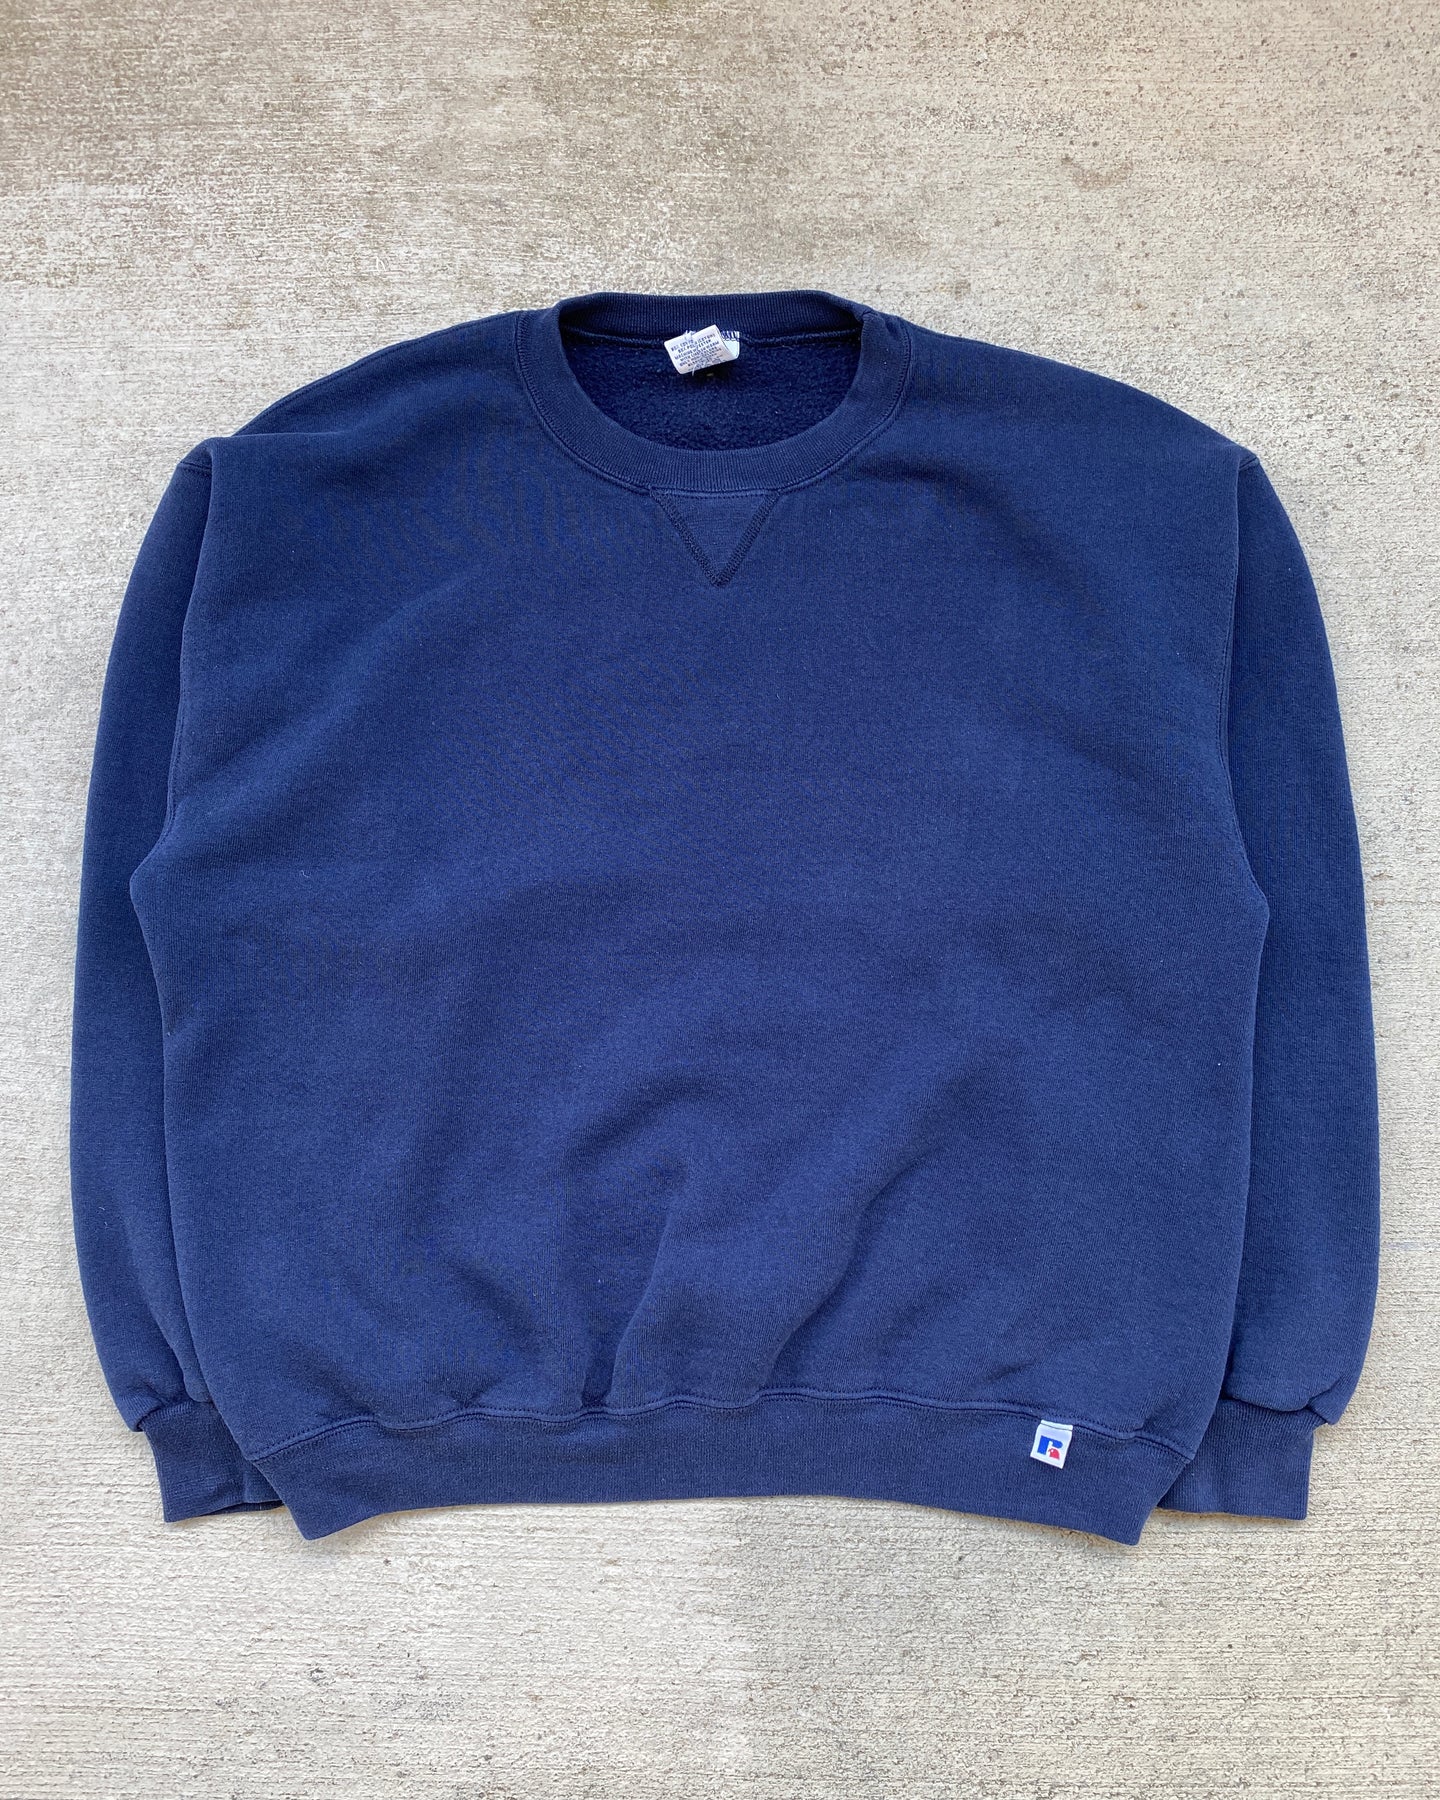 1990s Russell Athletic Navy Blank Crewneck - Size Large